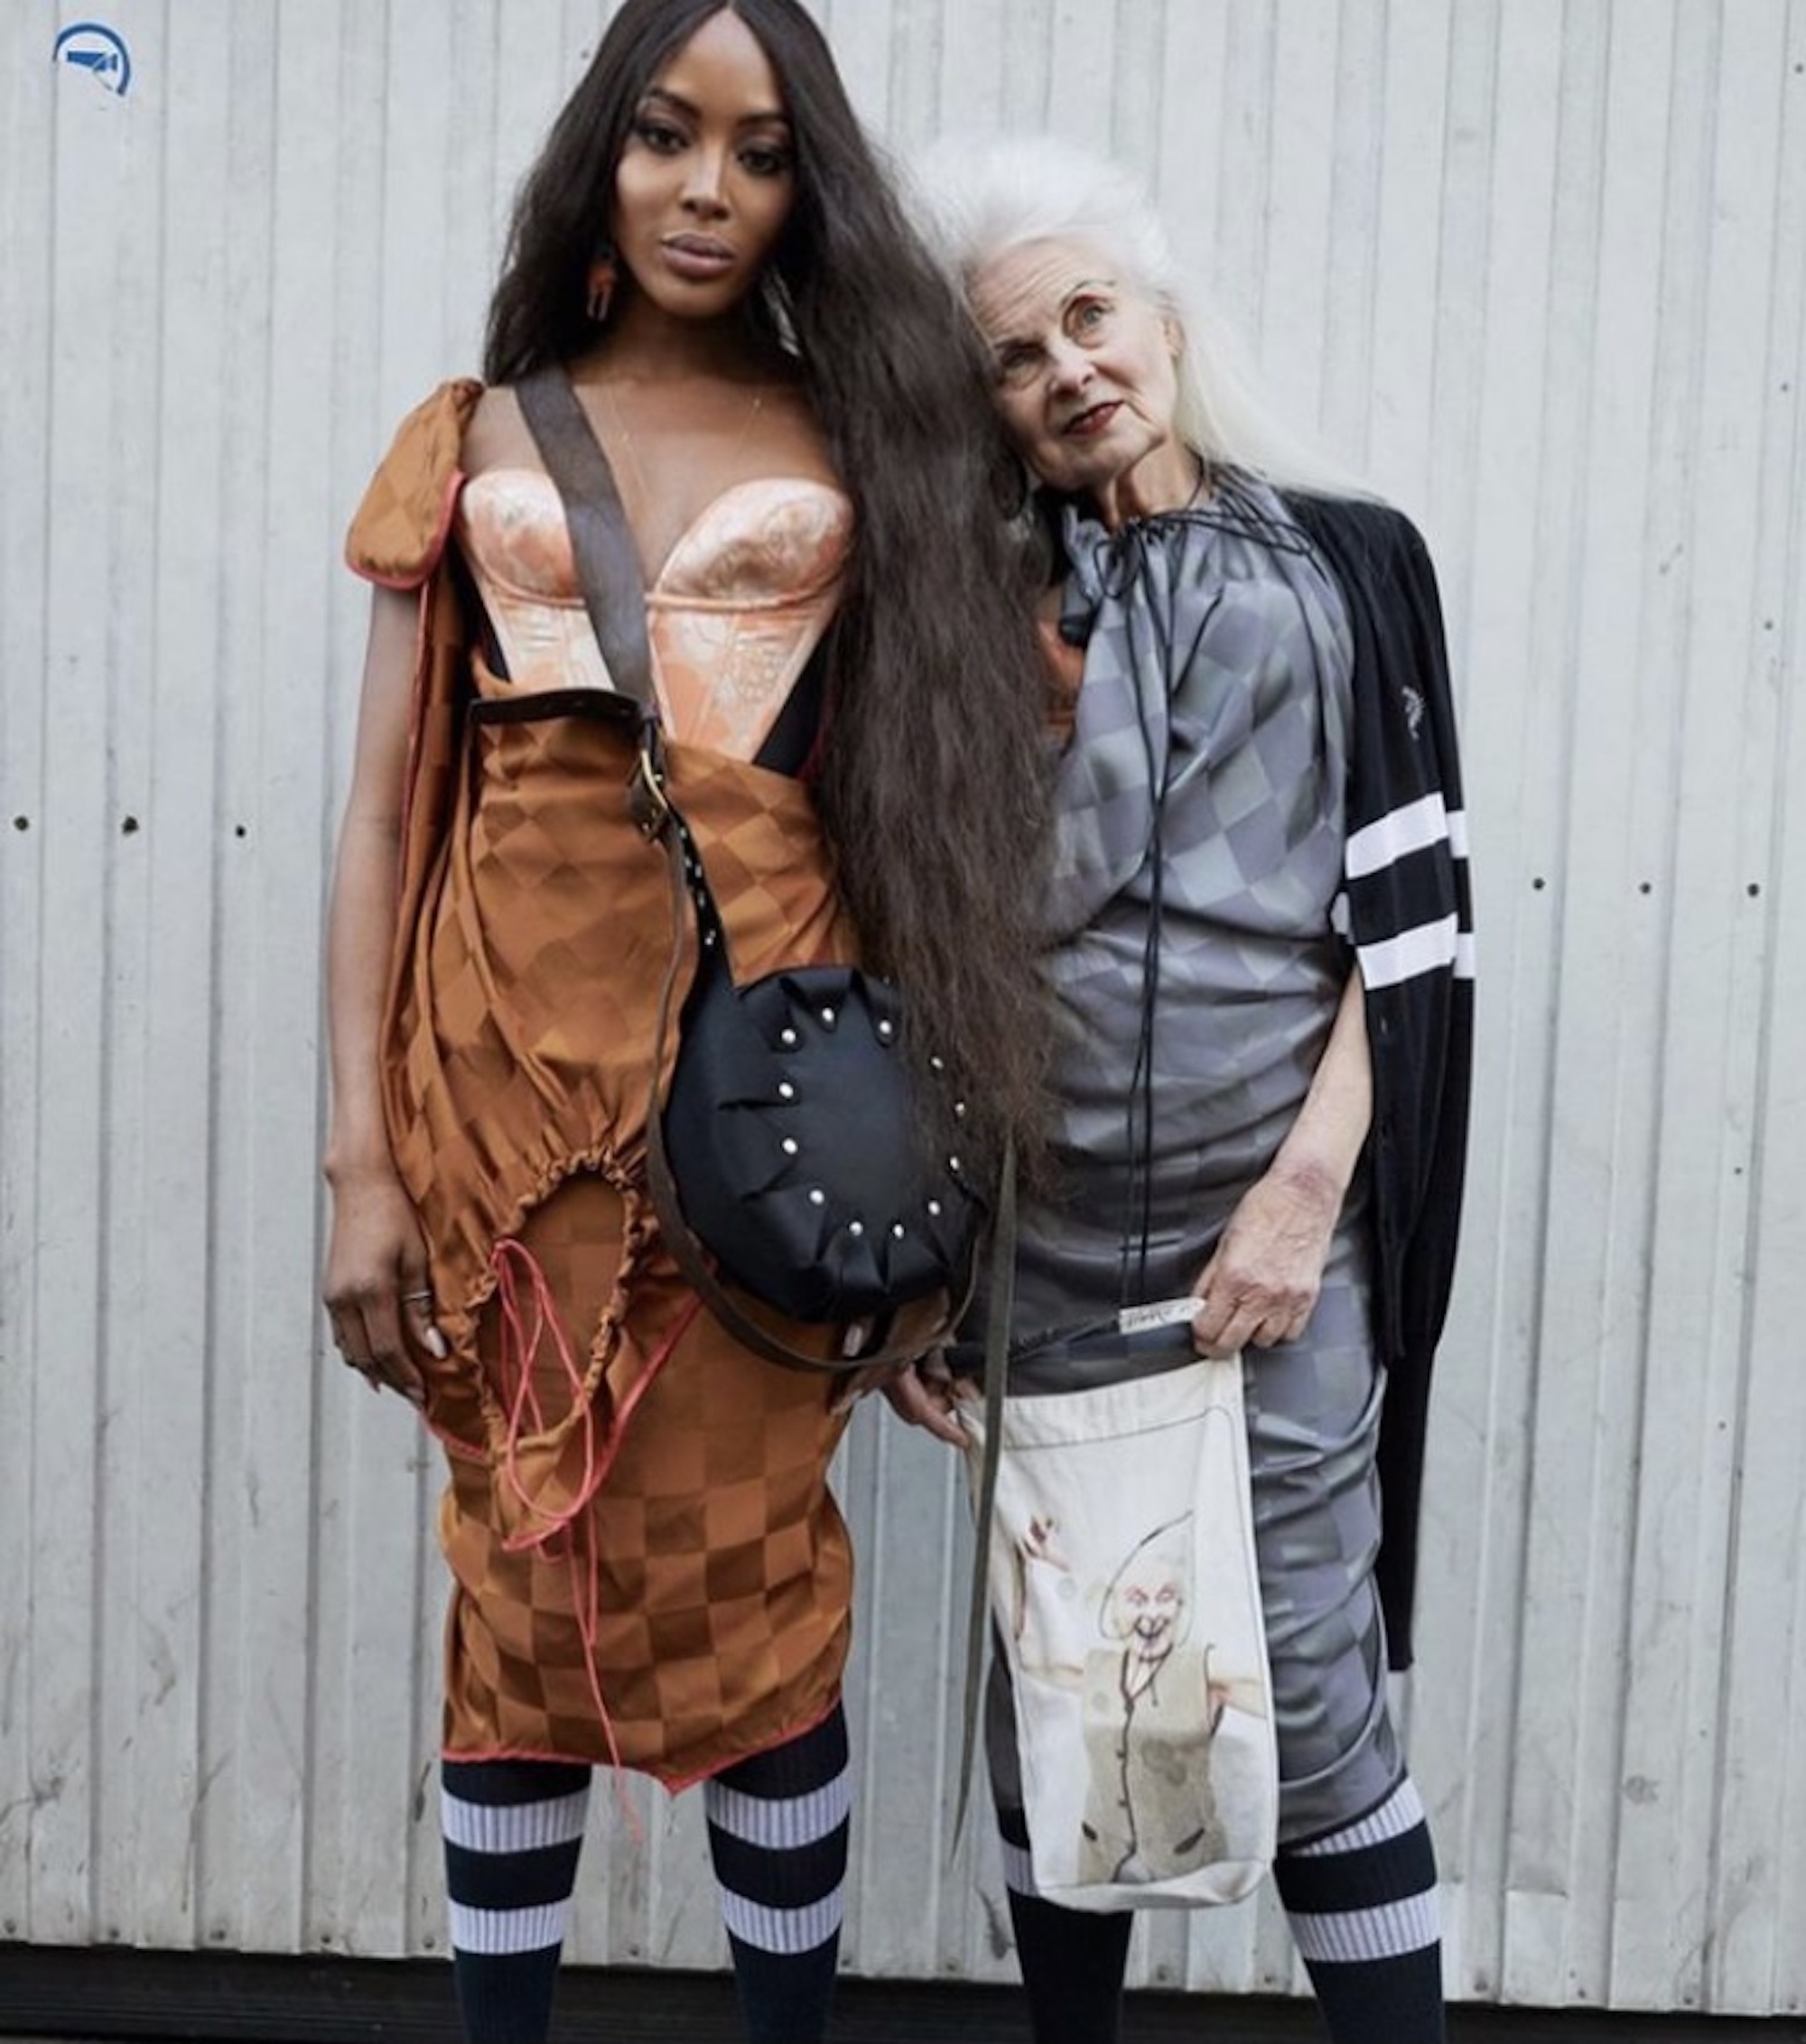 Vivienne Westwood and Naomi Campbell